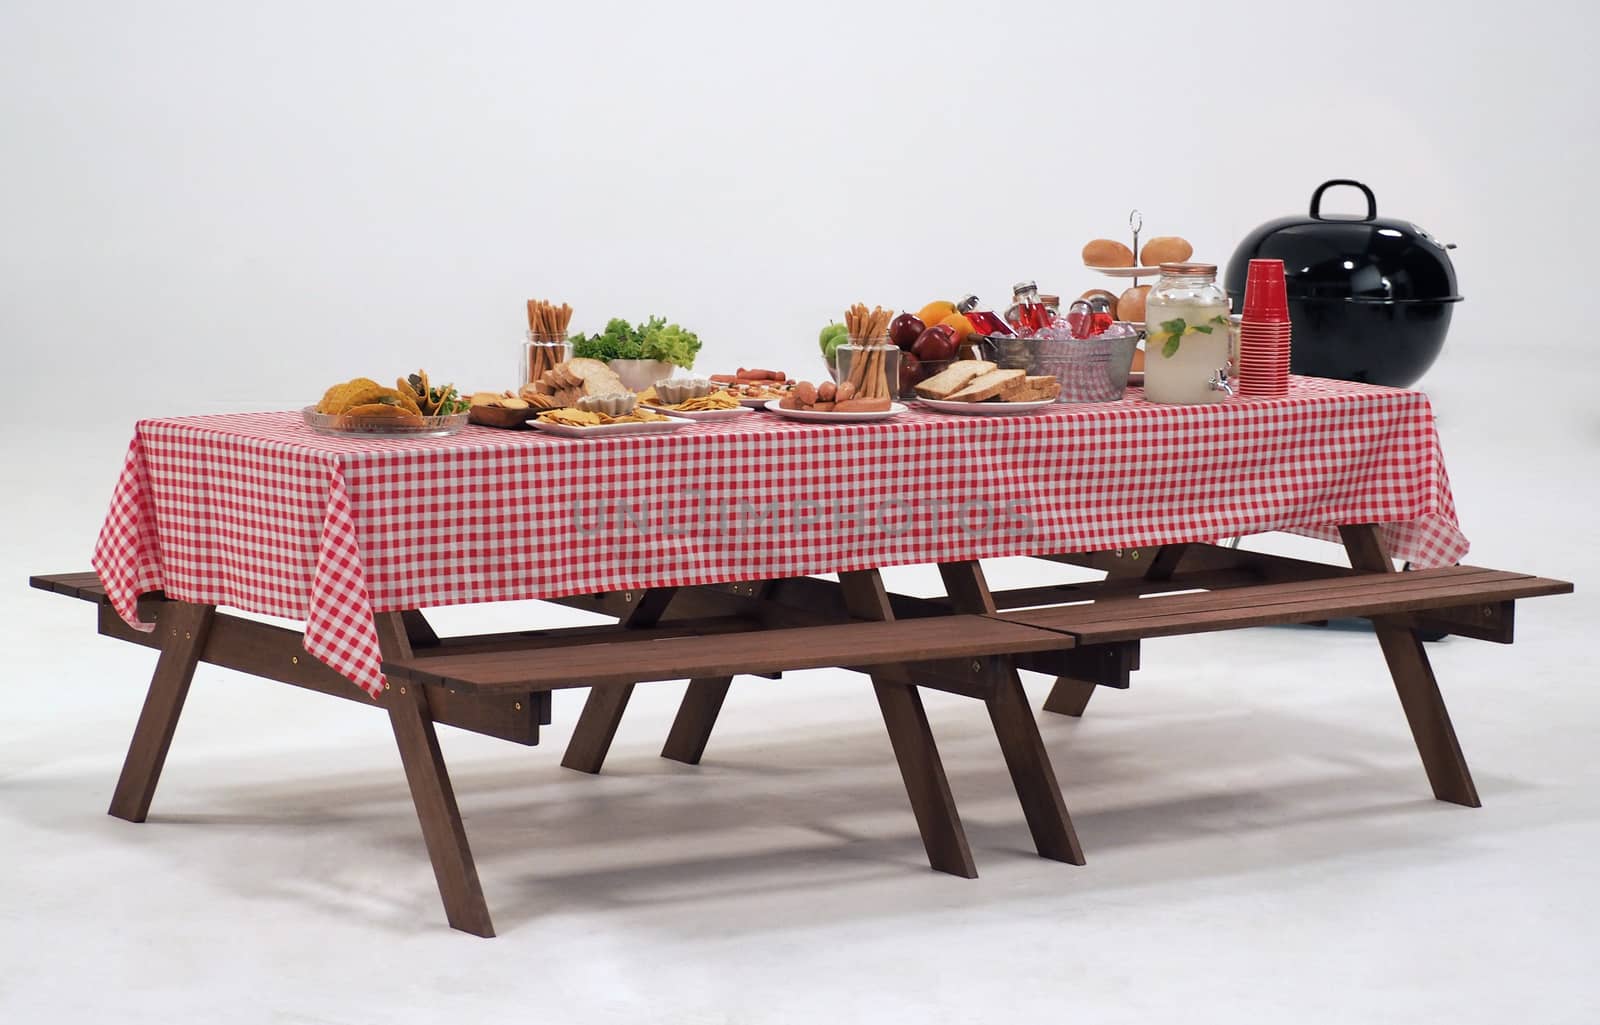 Wood table and red napkin cover for outdoor party or picnic in the garden for summer season and white background.